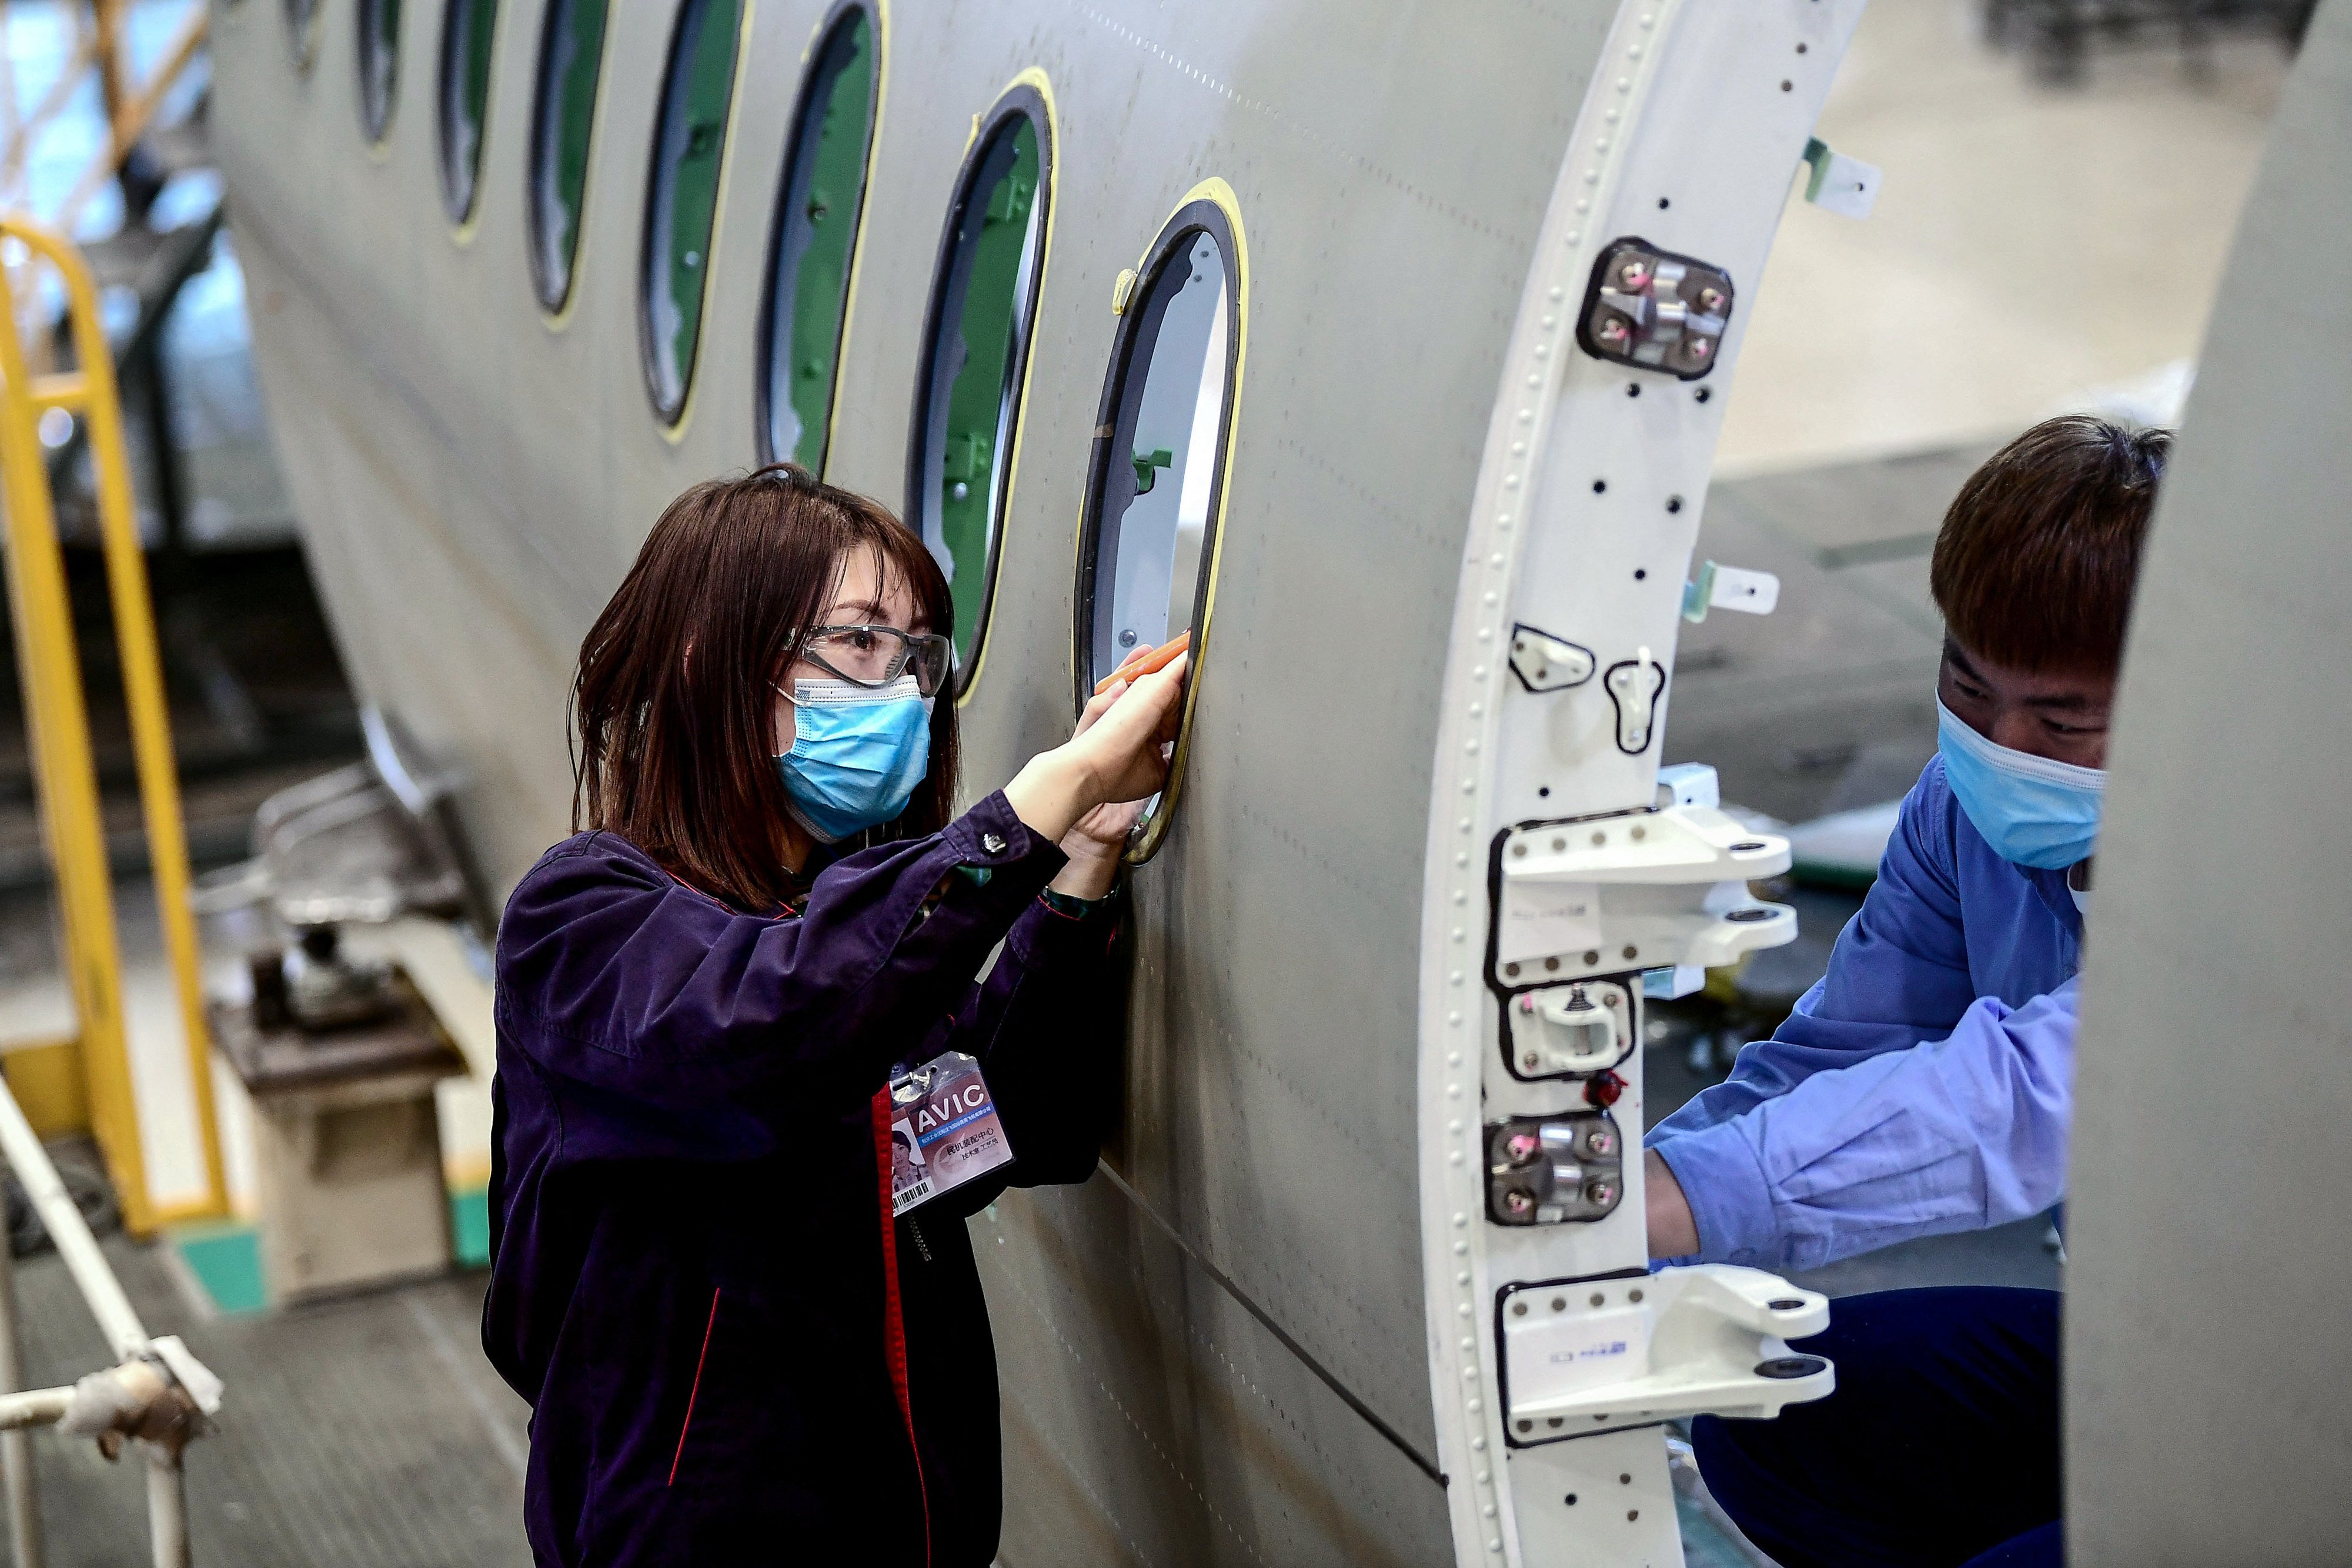 Airbus is set to double the capacity at its A320 family assembly plant in Tianjin following a state visit to China by French President Emmanuel Macron in April. Photo: AFP